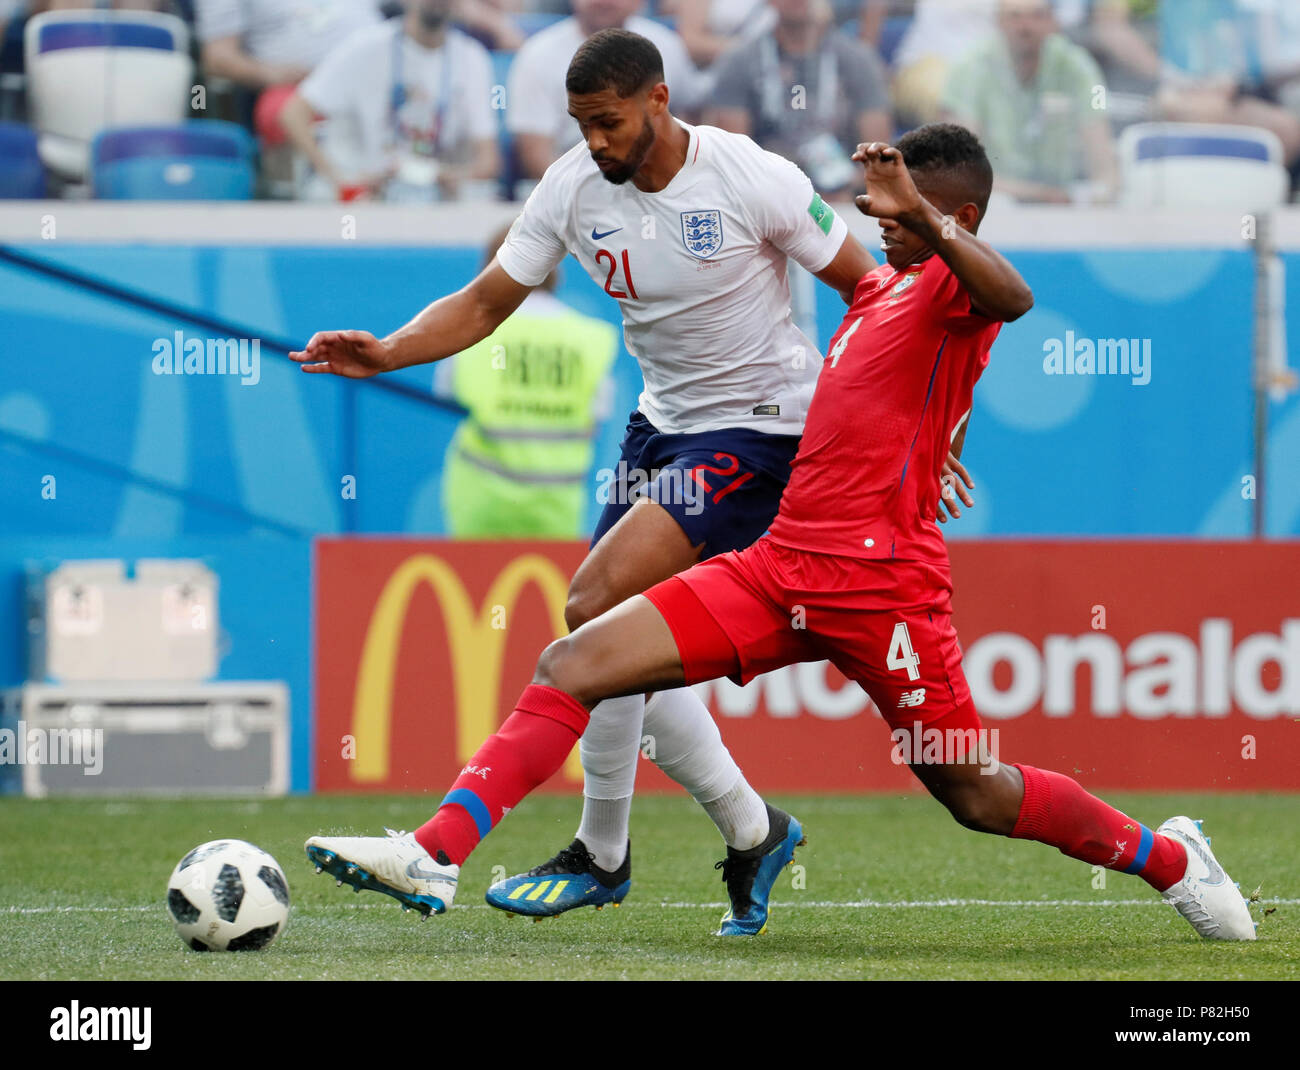 NIZHNY NOVGOROD, RUSSIA - JUNE 24: Ruben Loftus-Cheek (L) of England national team and Fidel Escobar of Panama national team vie for the ball during the 2018 FIFA World Cup Russia group G match between England and Panama at Nizhny Novgorod Stadium on June 24, 2018 in Nizhny Novgorod, Russia. (MB Media) Stock Photo